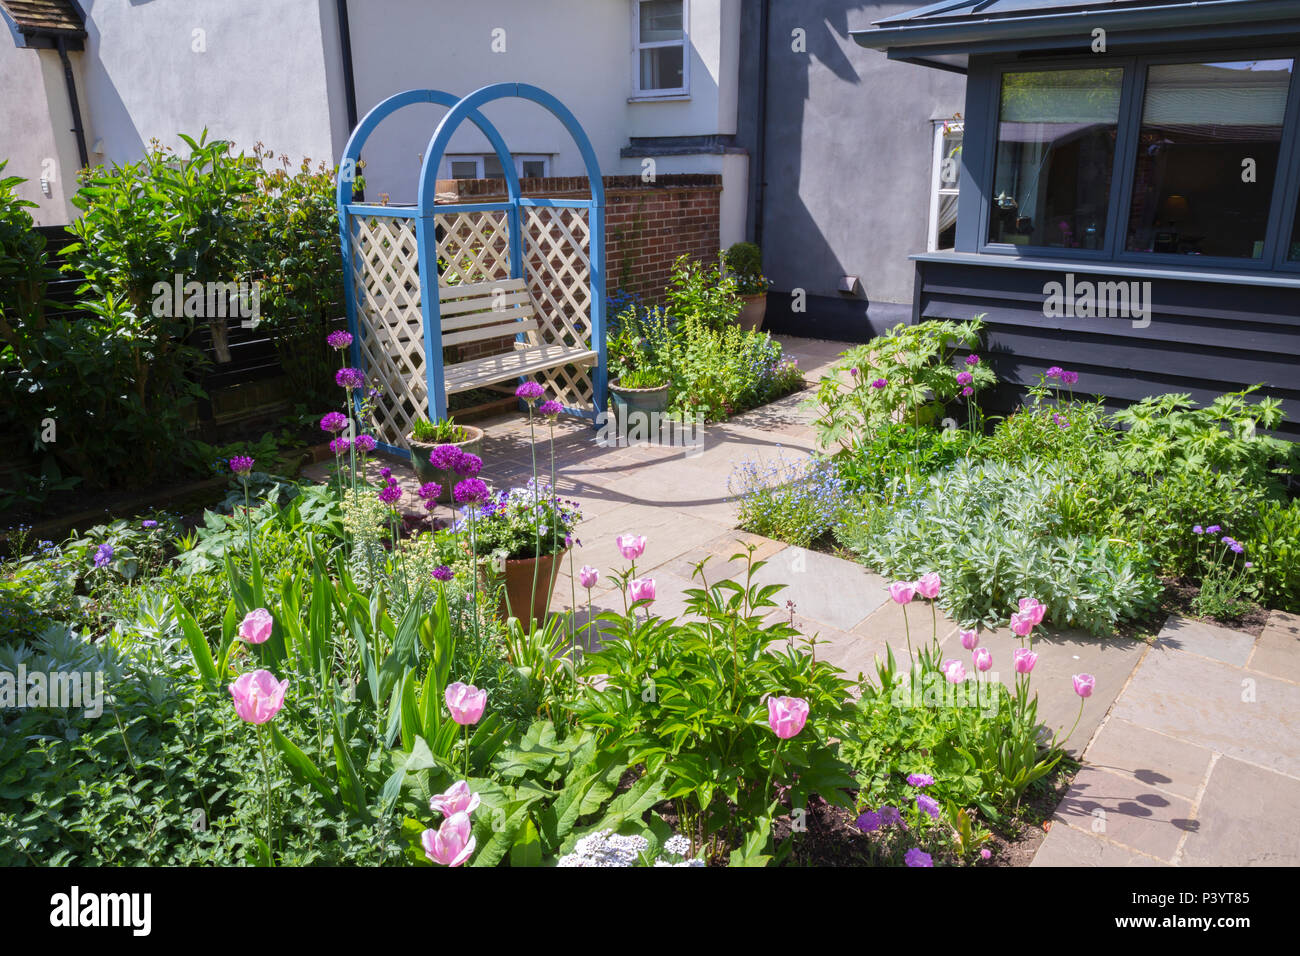 Overview of blue Arbour seating area, kitchen extension and garden patio borders containing Tulipa 'Pink Diamond', Artemisia ludoviciana 'Valerie Finn Stock Photo